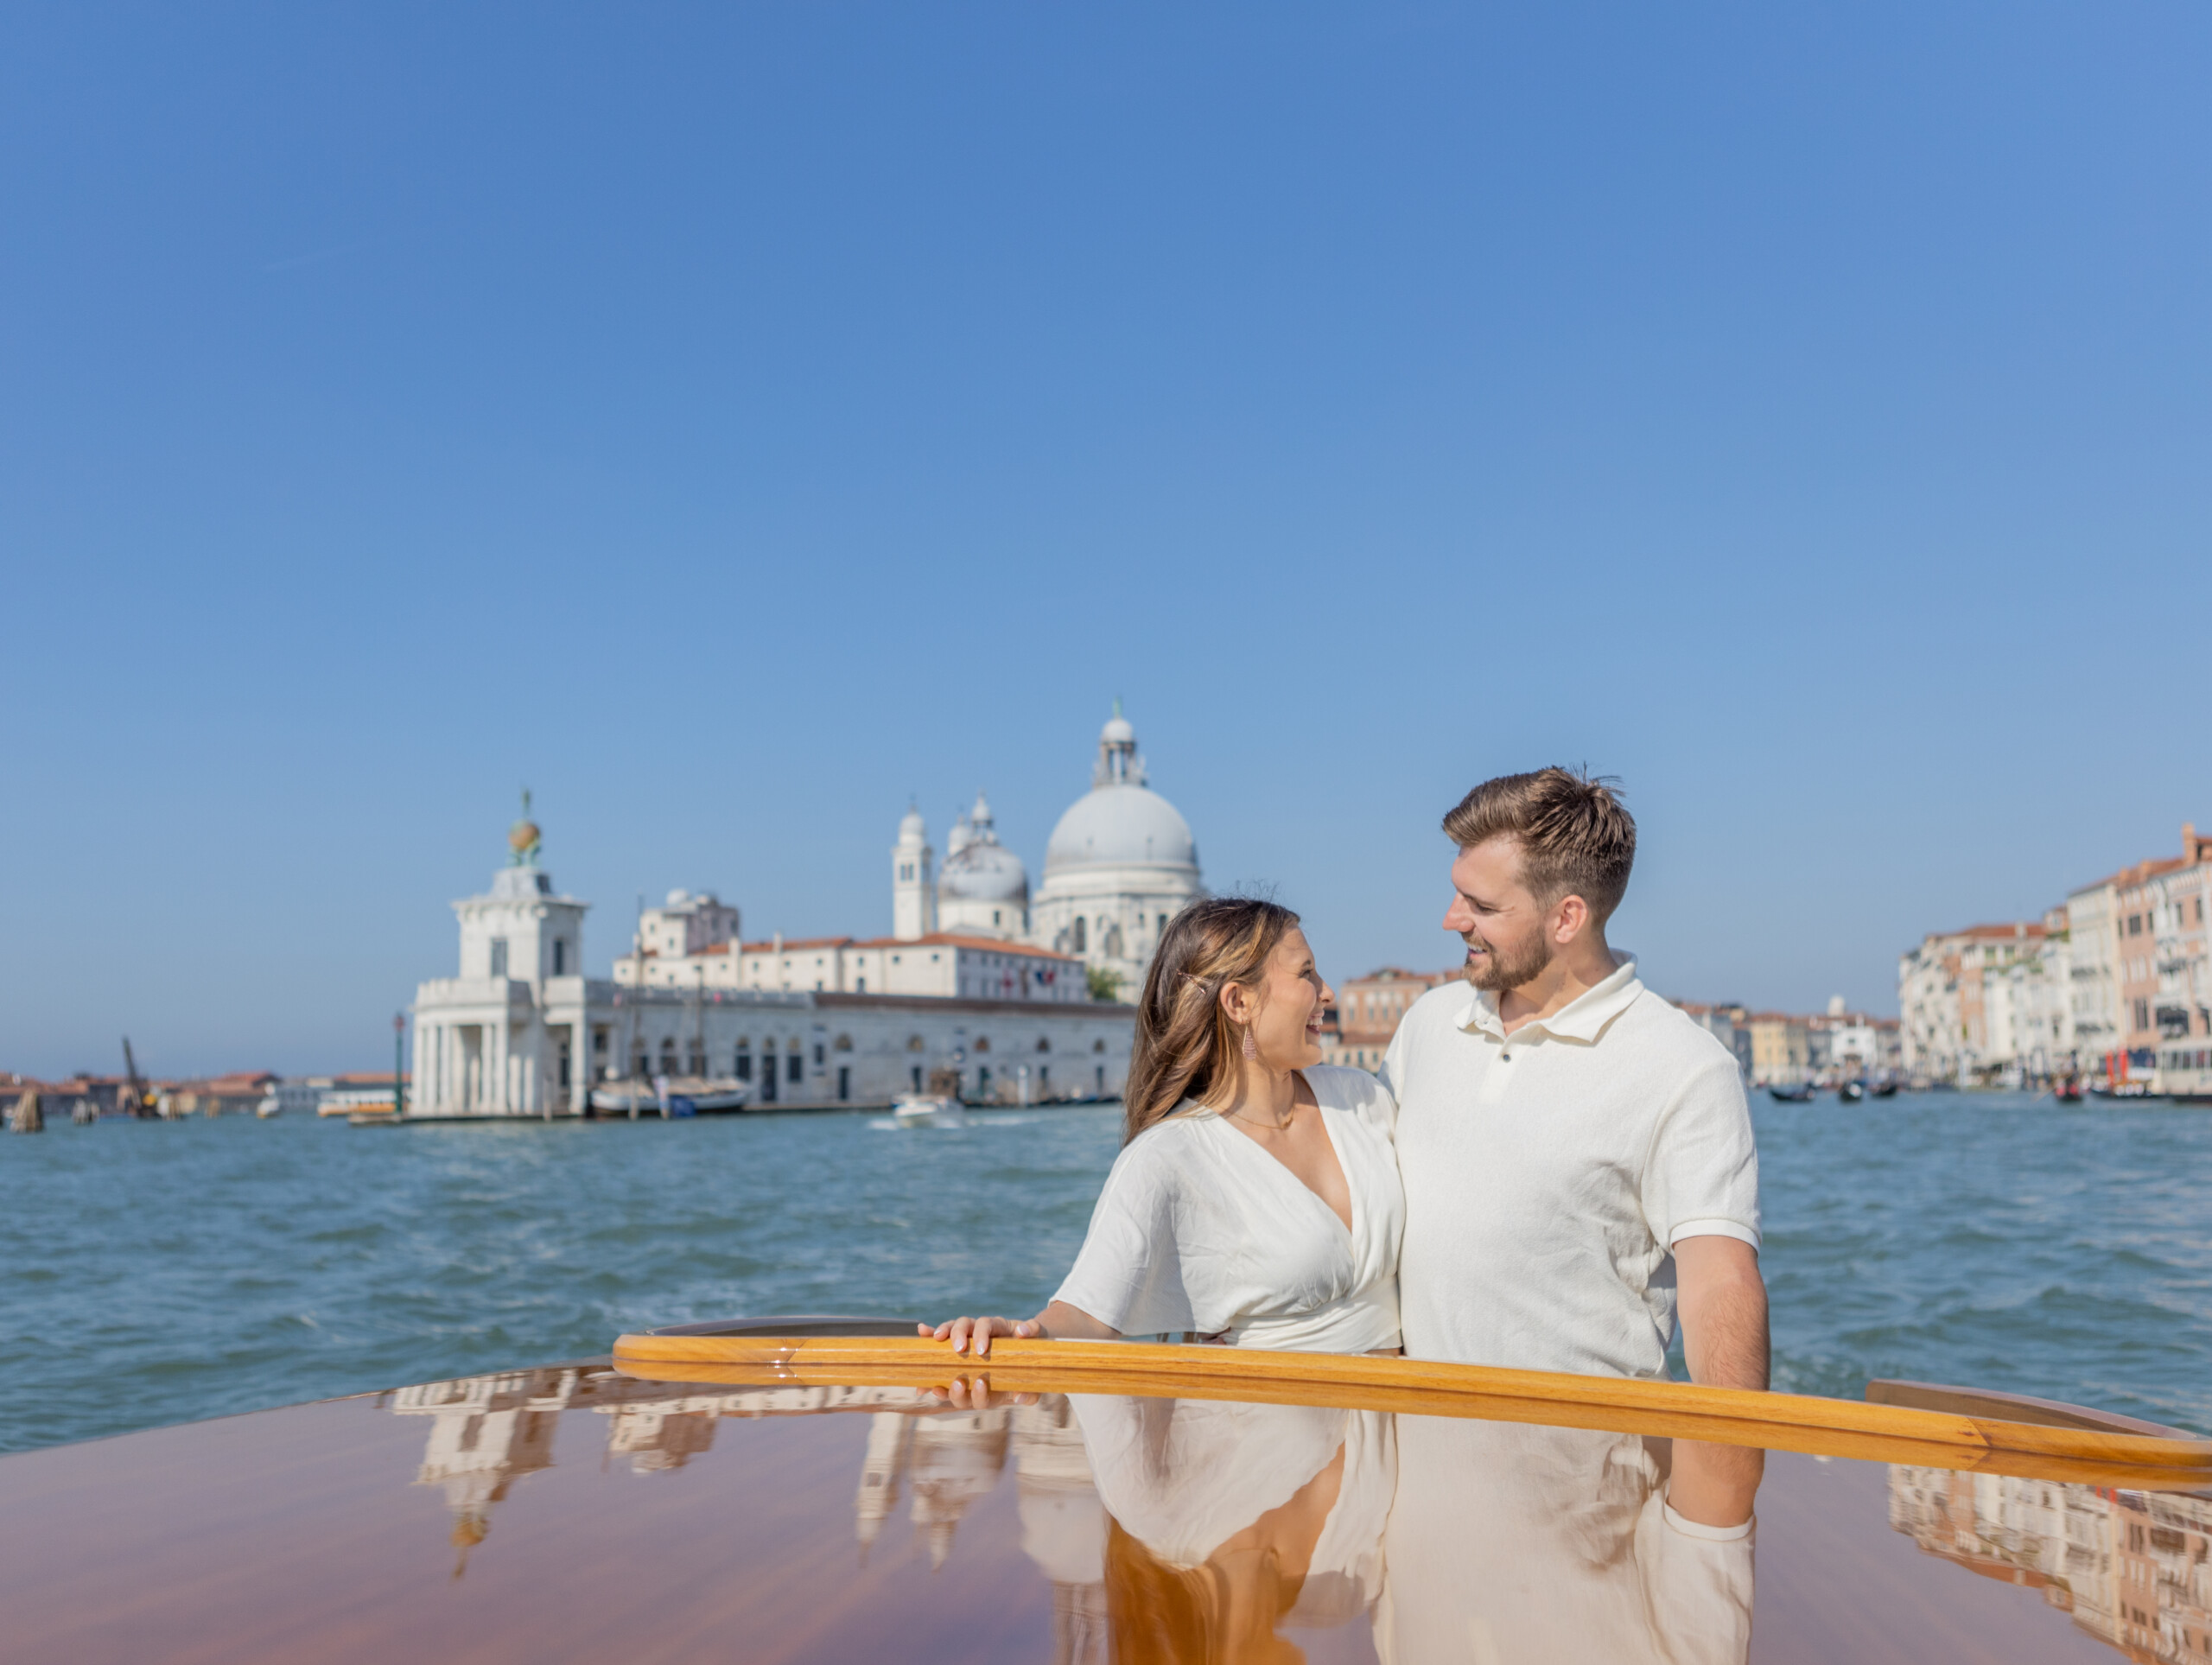 Engagement photoshoot in venice